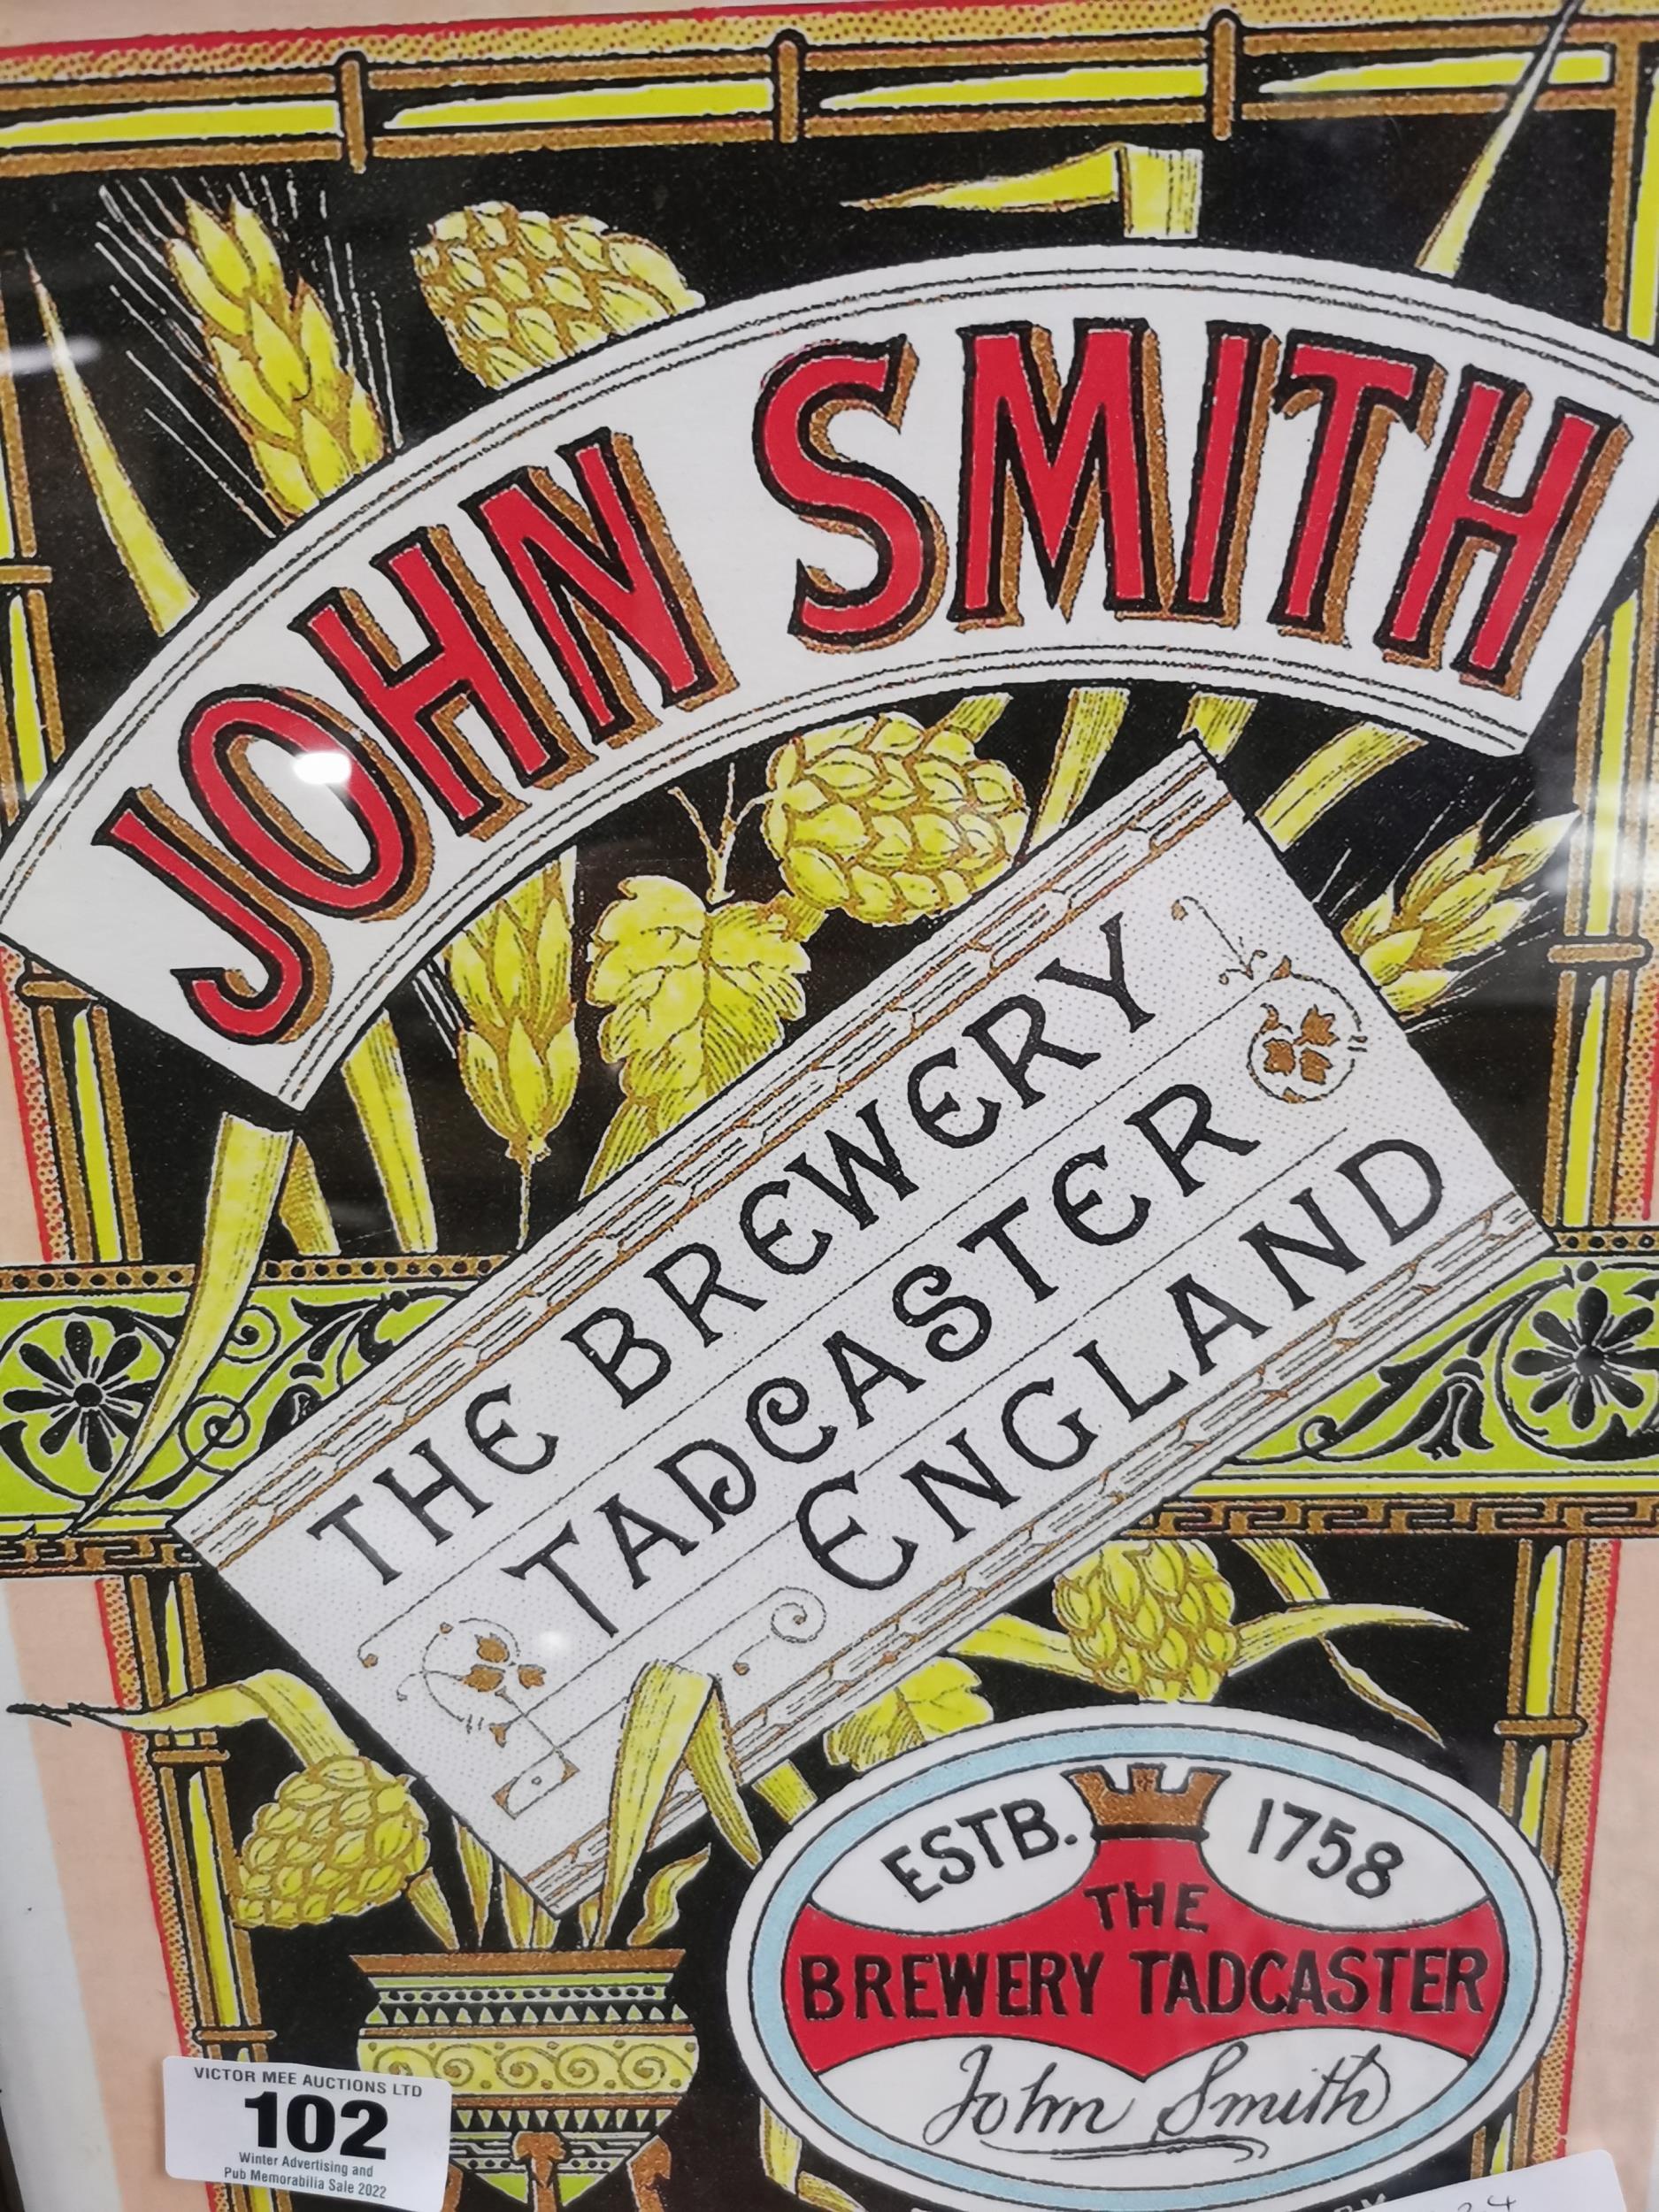 John Smith Brewery Tadcaster England framed advertising print. {42 cm H x 33 cmW}. - Image 2 of 2